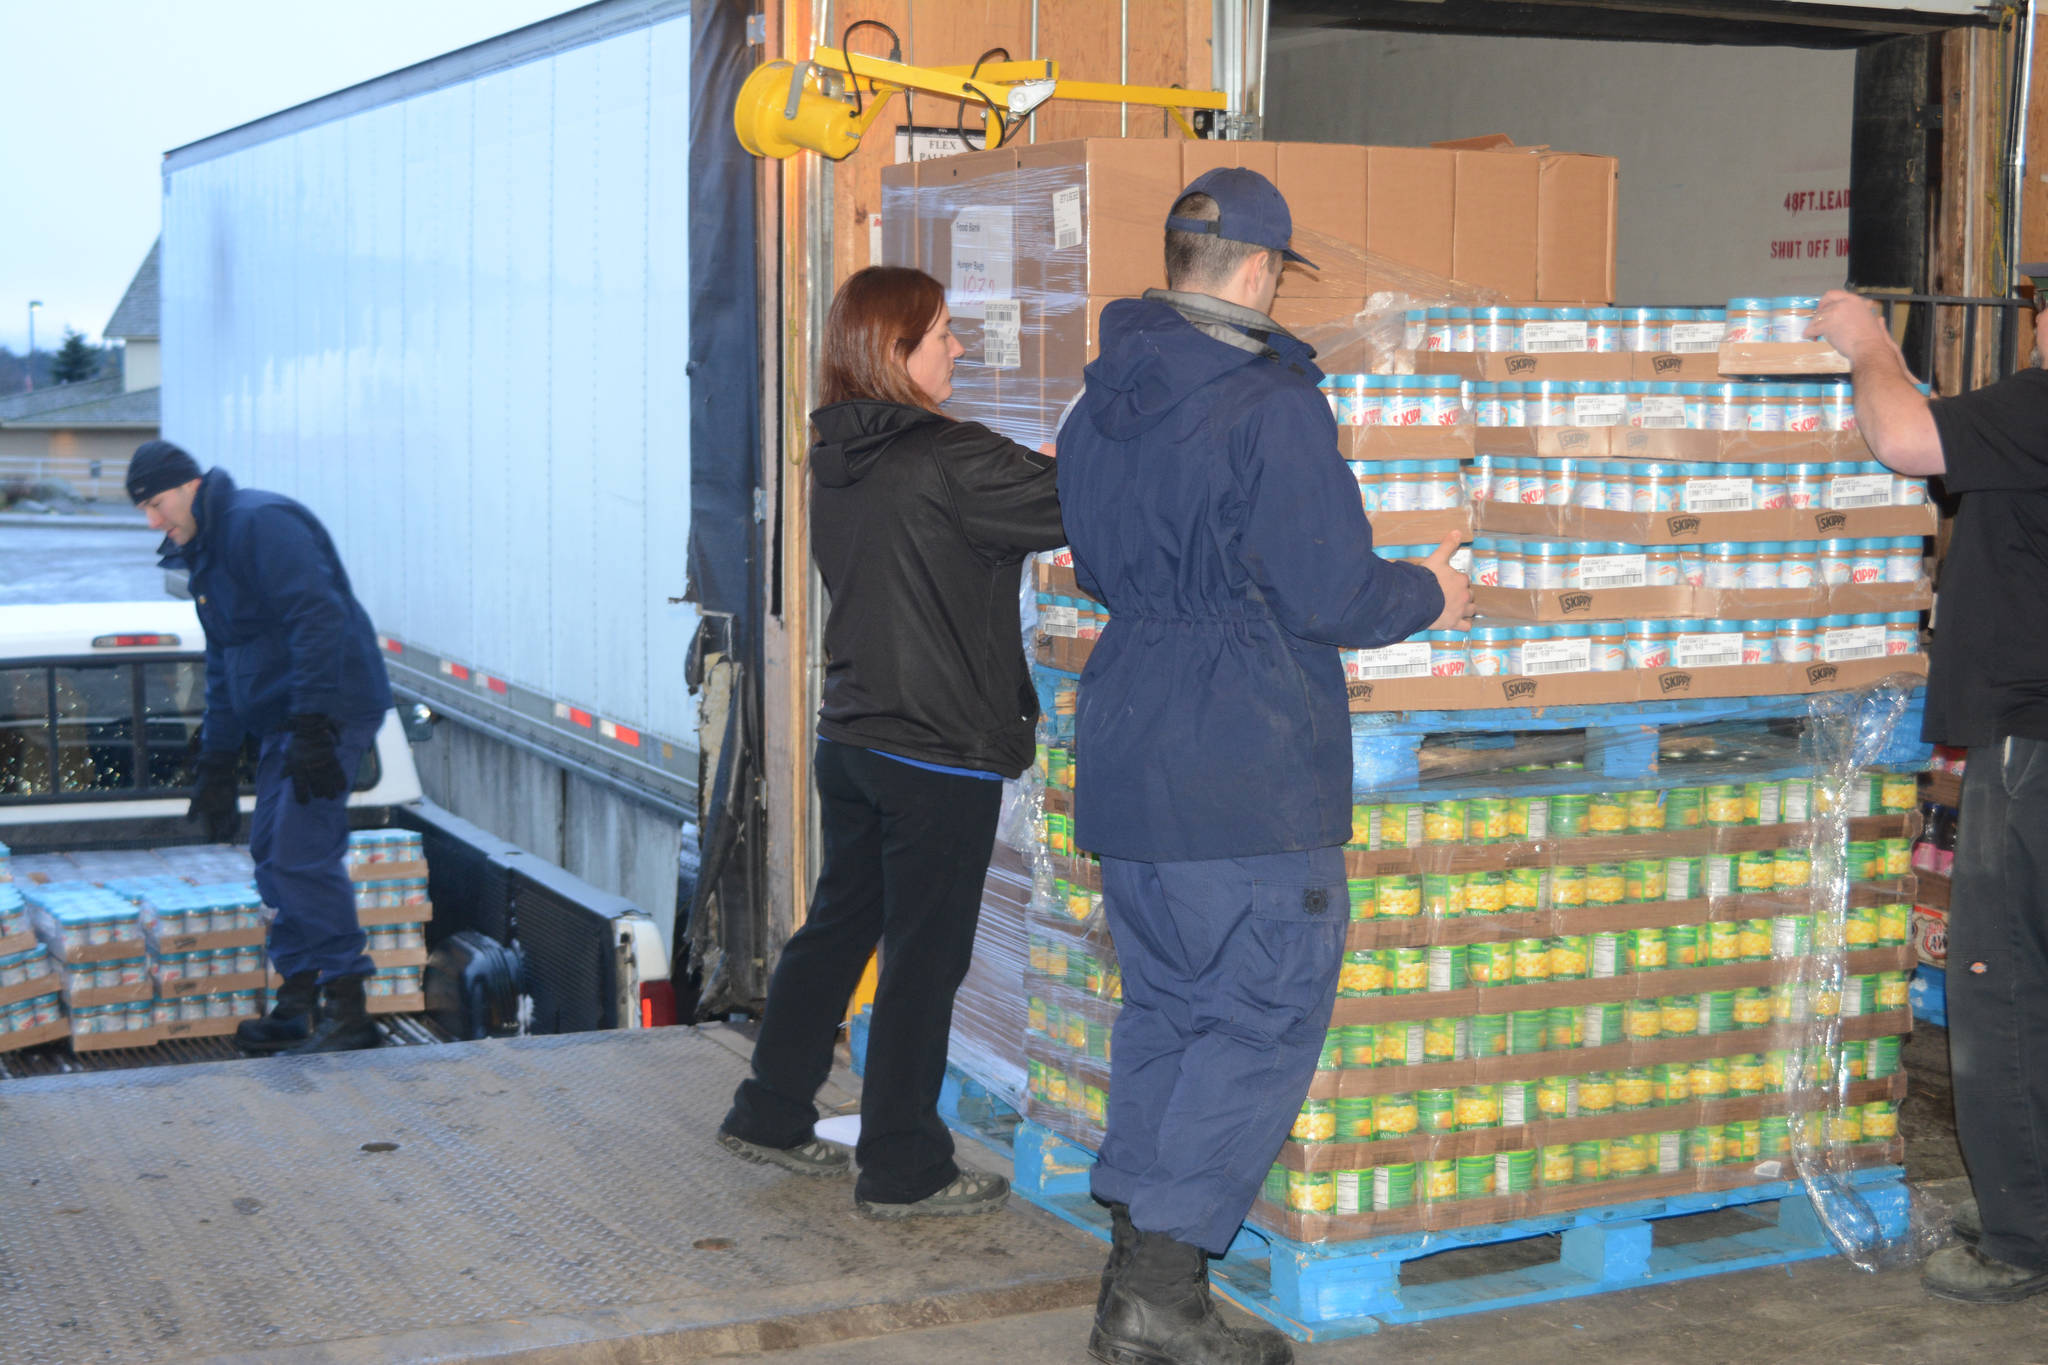 U.S. Coast Guard Cutter Naushon crew member Jordan Dorchin, right, helps Homer Safeway assistant store manager Tiffany Biggs, center, load Hunger Bag food onto a truck as his fellow crew member James Bannon, left, packs the truck Tuesday, Dec. 5, 2017. The Coast Guard members delivered food to the Homer Community Food Pantry Tuesday morning that had been purchased by Safeway customers as part of its Hunger Bag project. Store Manager Bob Malone said about 1,300 bags at $10 each had been sold at the Homer store since Nov. 1. Through a national program, Safeway sells the bags and donates food to charities chosen by local stores. Pallets of food are organized at the Anchorage warehouse and sent to Homer. “This year, from what I understand, the need is more than normal,” Malone said.